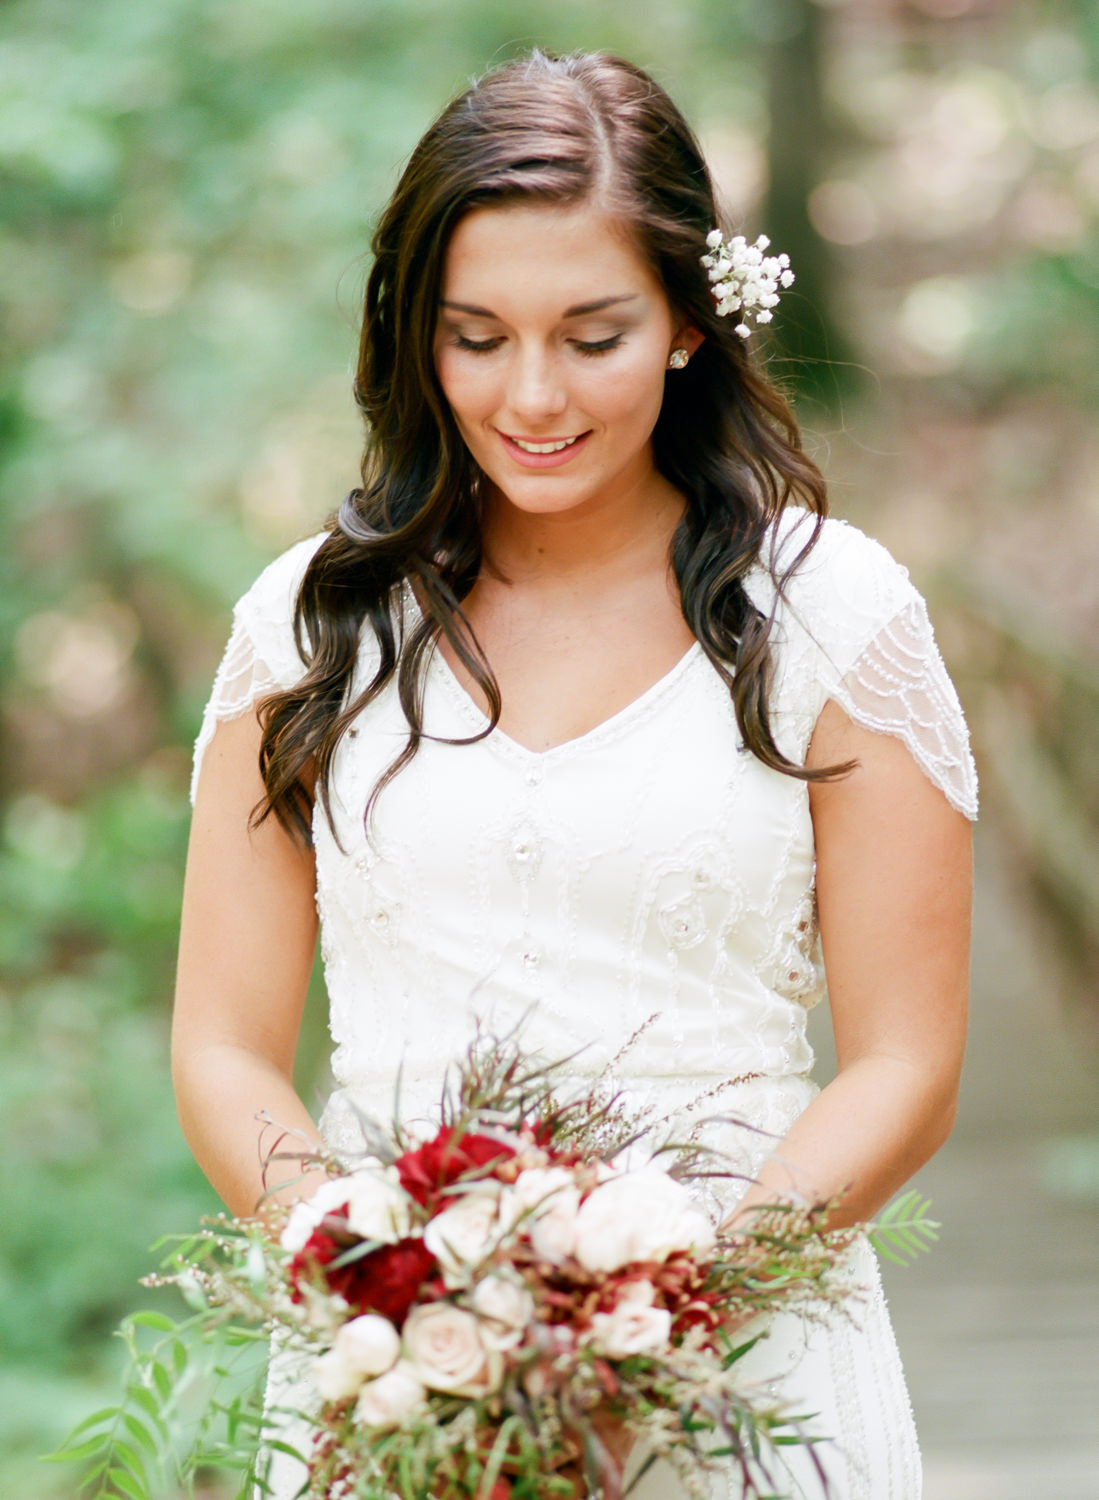 bride smiling at bouquet, St. Louis wedding photography, Erica Robnett Photography